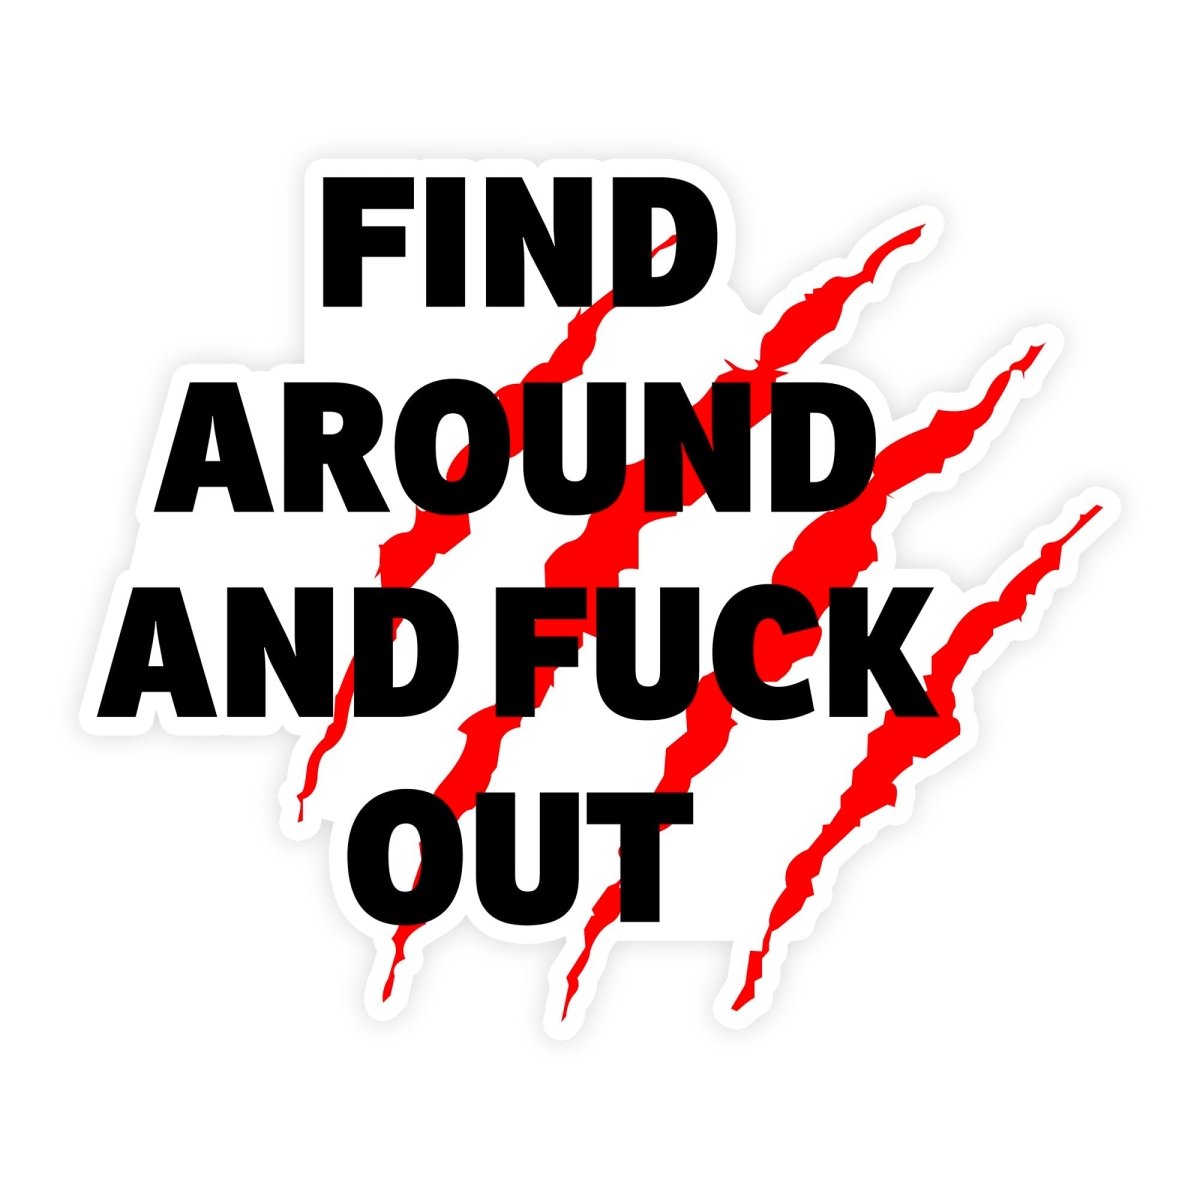 Find Around And Fuck Out Meme Sticker - stickerbullFind Around And Fuck Out Meme StickerStickersstickerbullstickerbullTaylor_FindAroundFuckOutFind Around And Fuck Out Meme Sticker